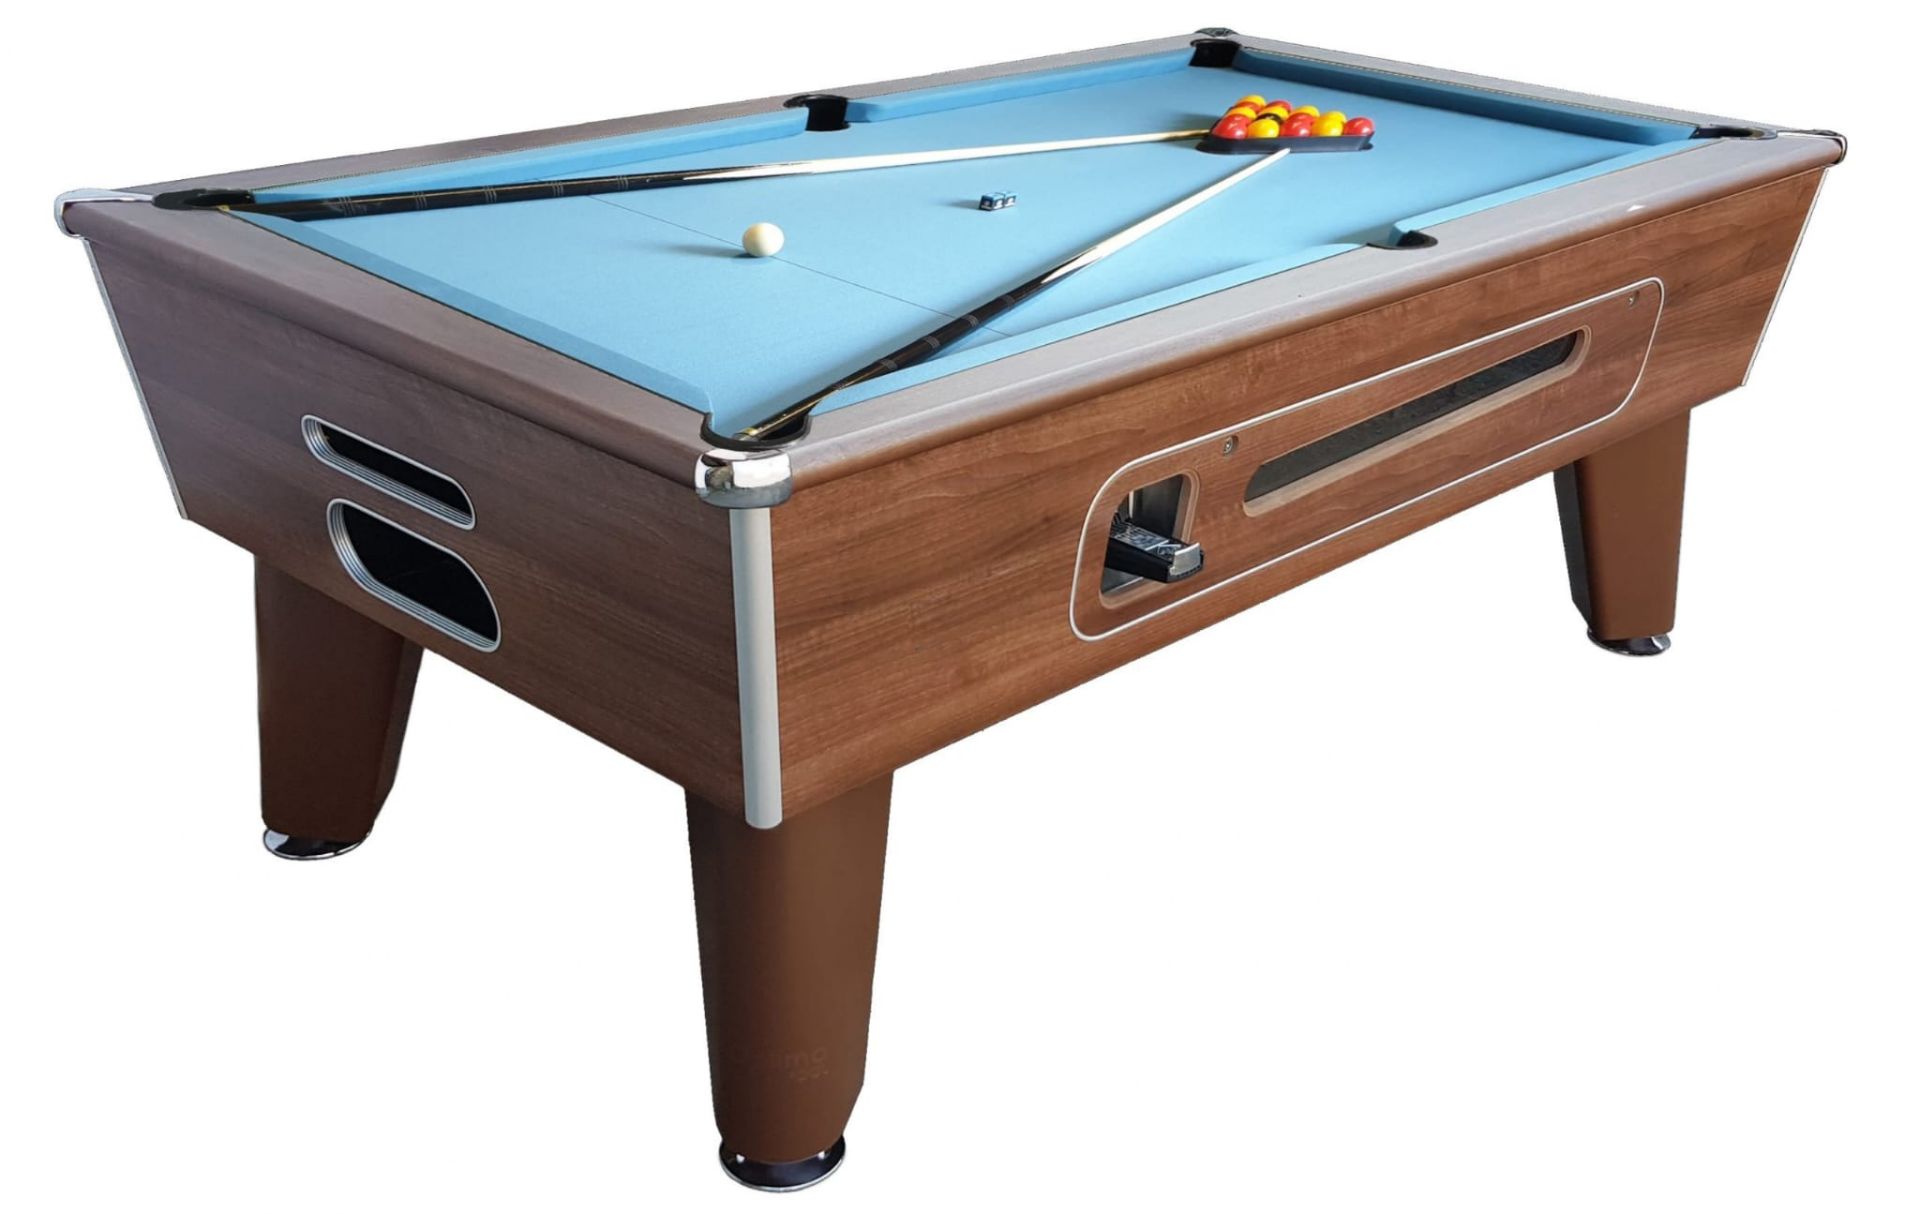 NEW POOL TABLE BARLINE TABLE 7X4 COIN OPERATED AND FREE PLAY - Image 2 of 3